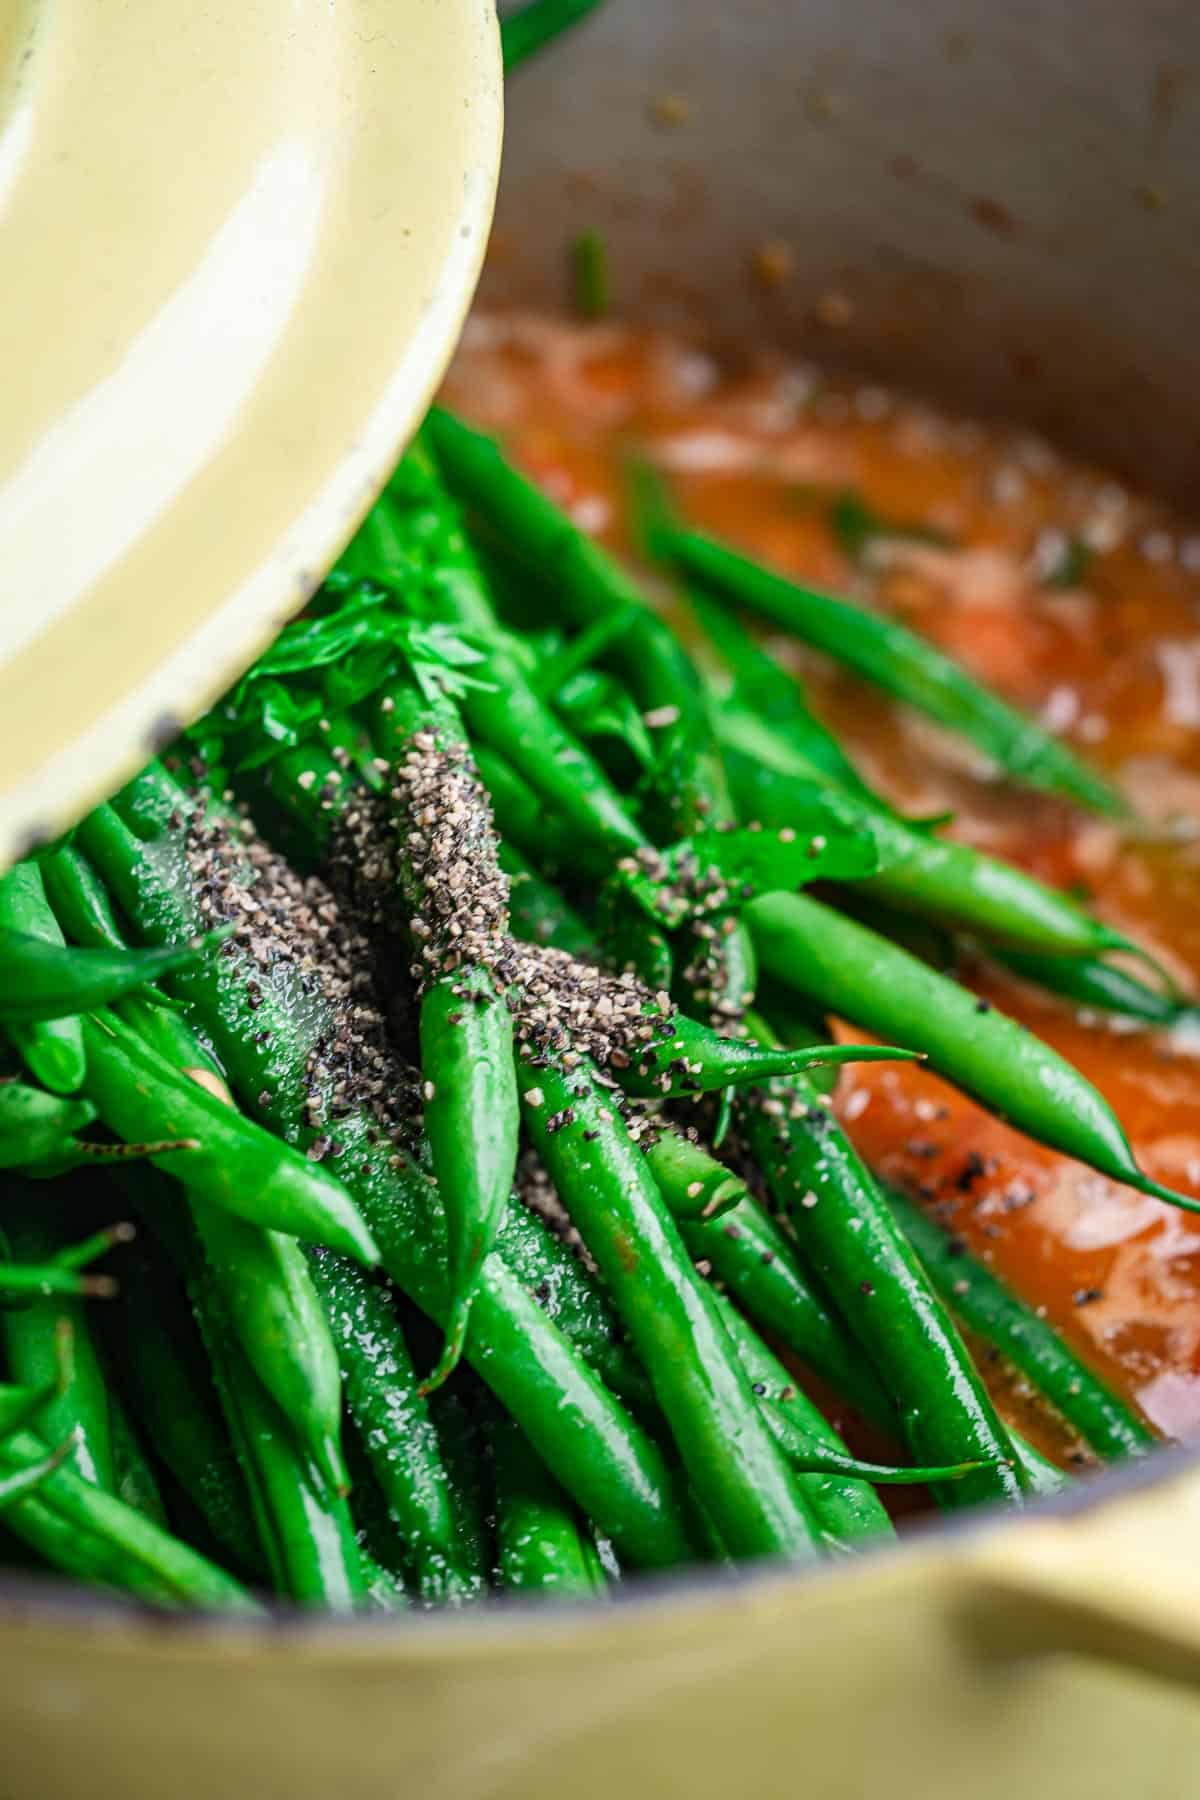 A cover being placed over green beans in a pot with spices.